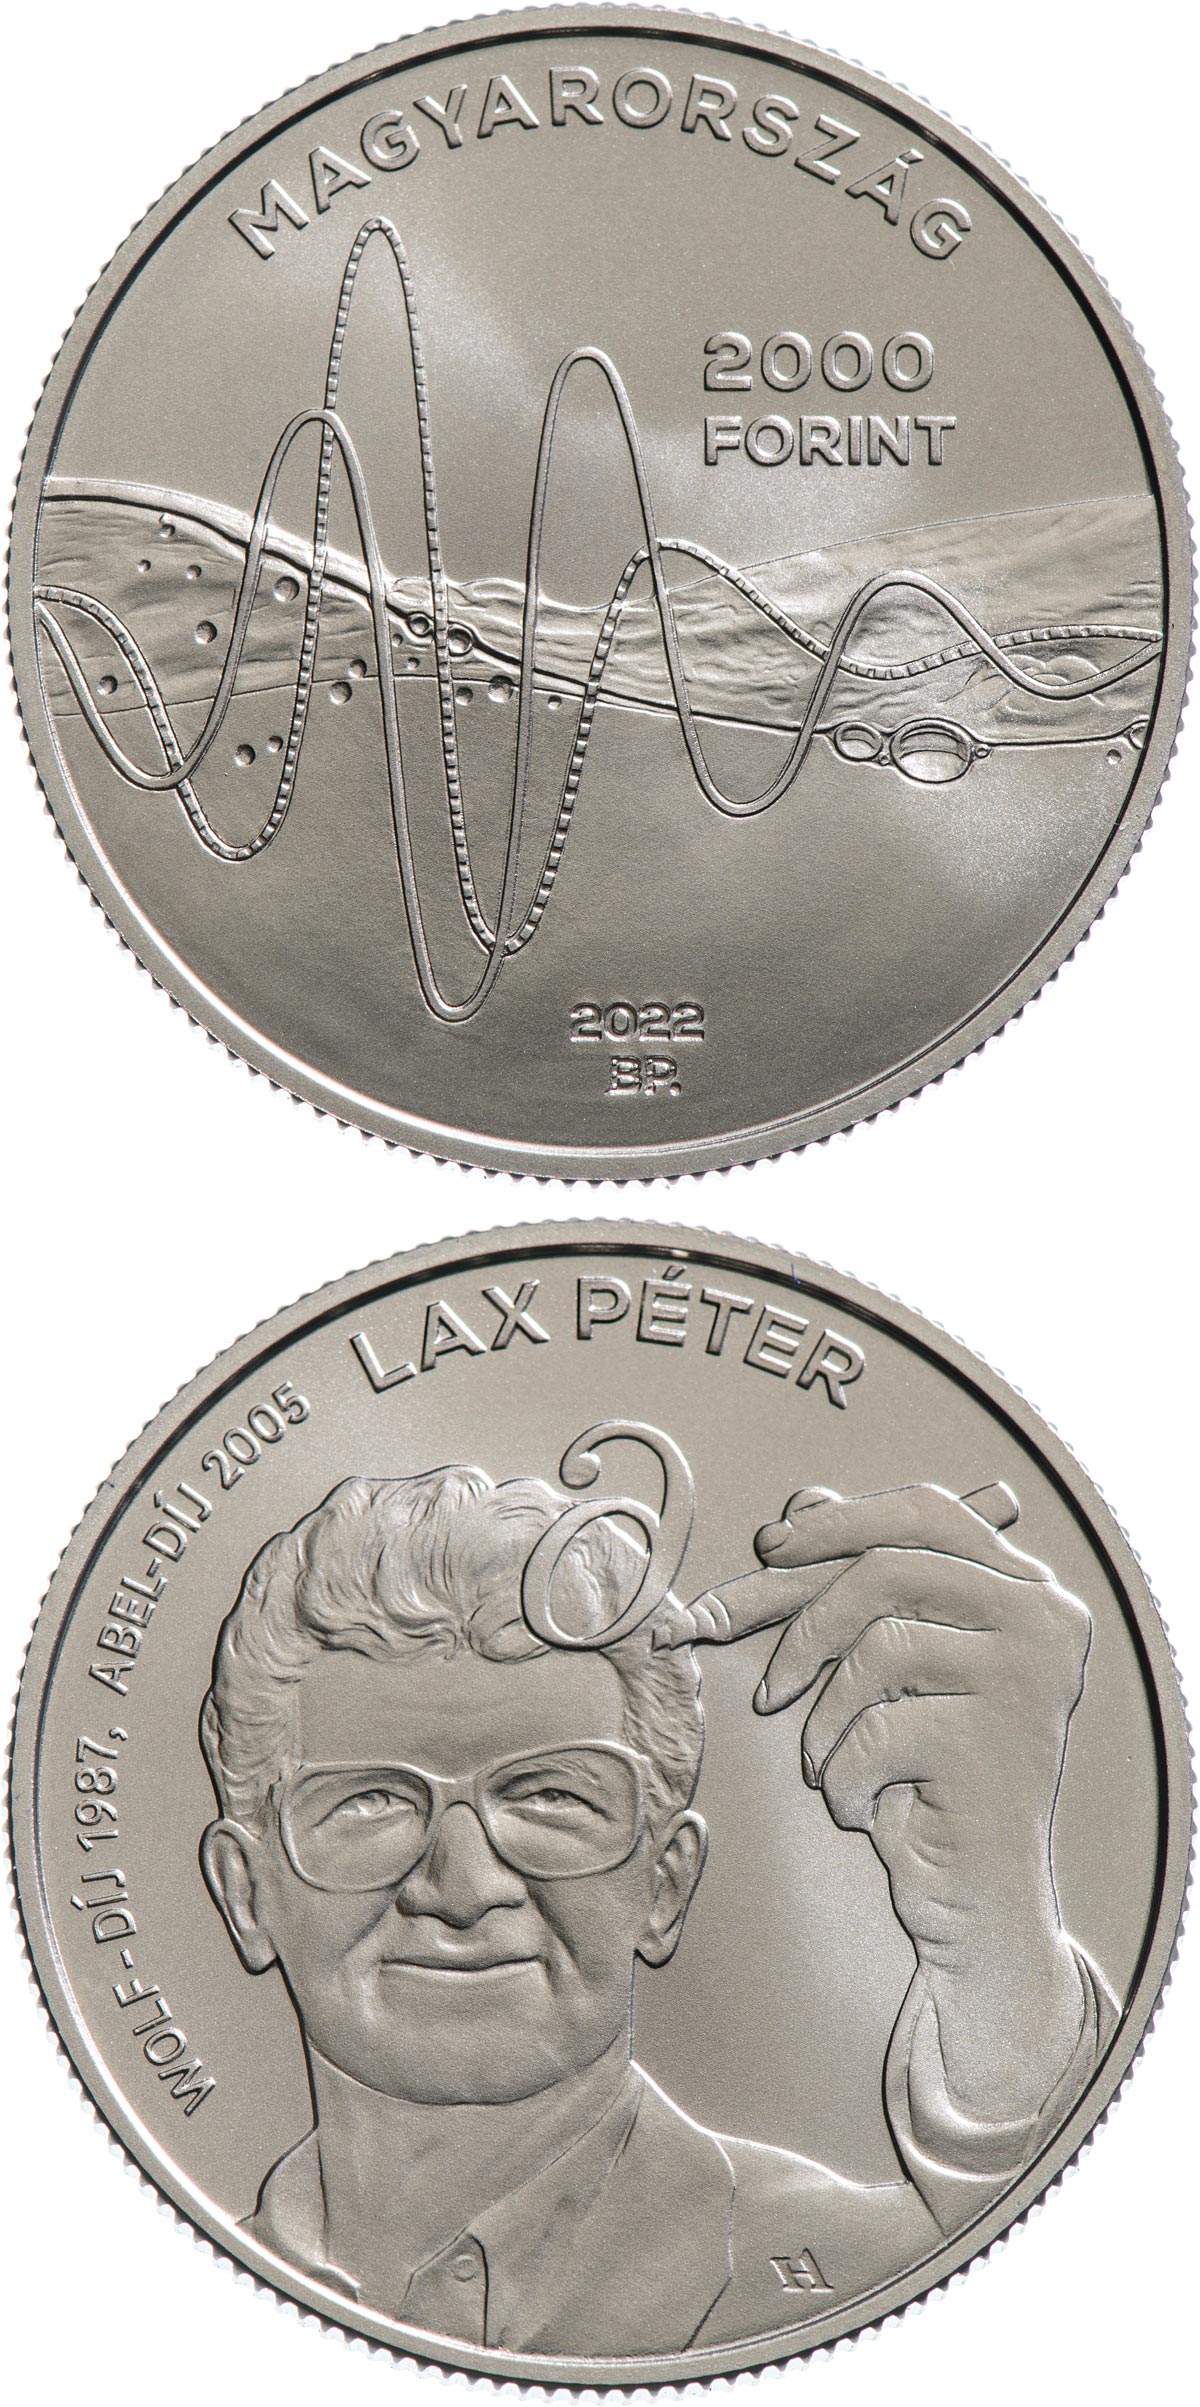 Image of 2000 forint coin - Wolf Prize Winners of Hungarian Descent | Hungary 2022.  The Copper–Nickel (CuNi) coin is of BU quality.